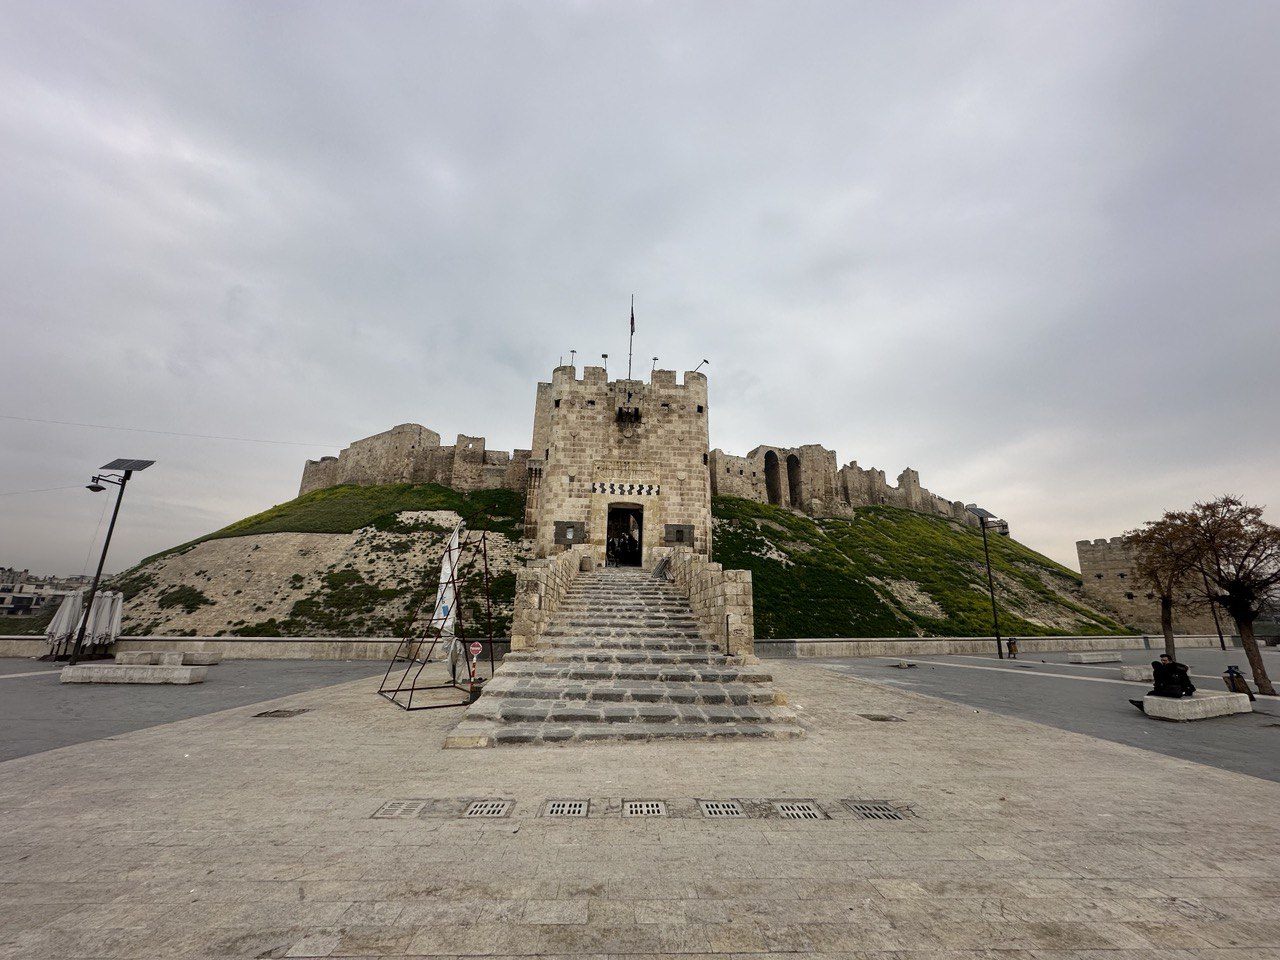 Aleppo Citadel is open again for tourists!